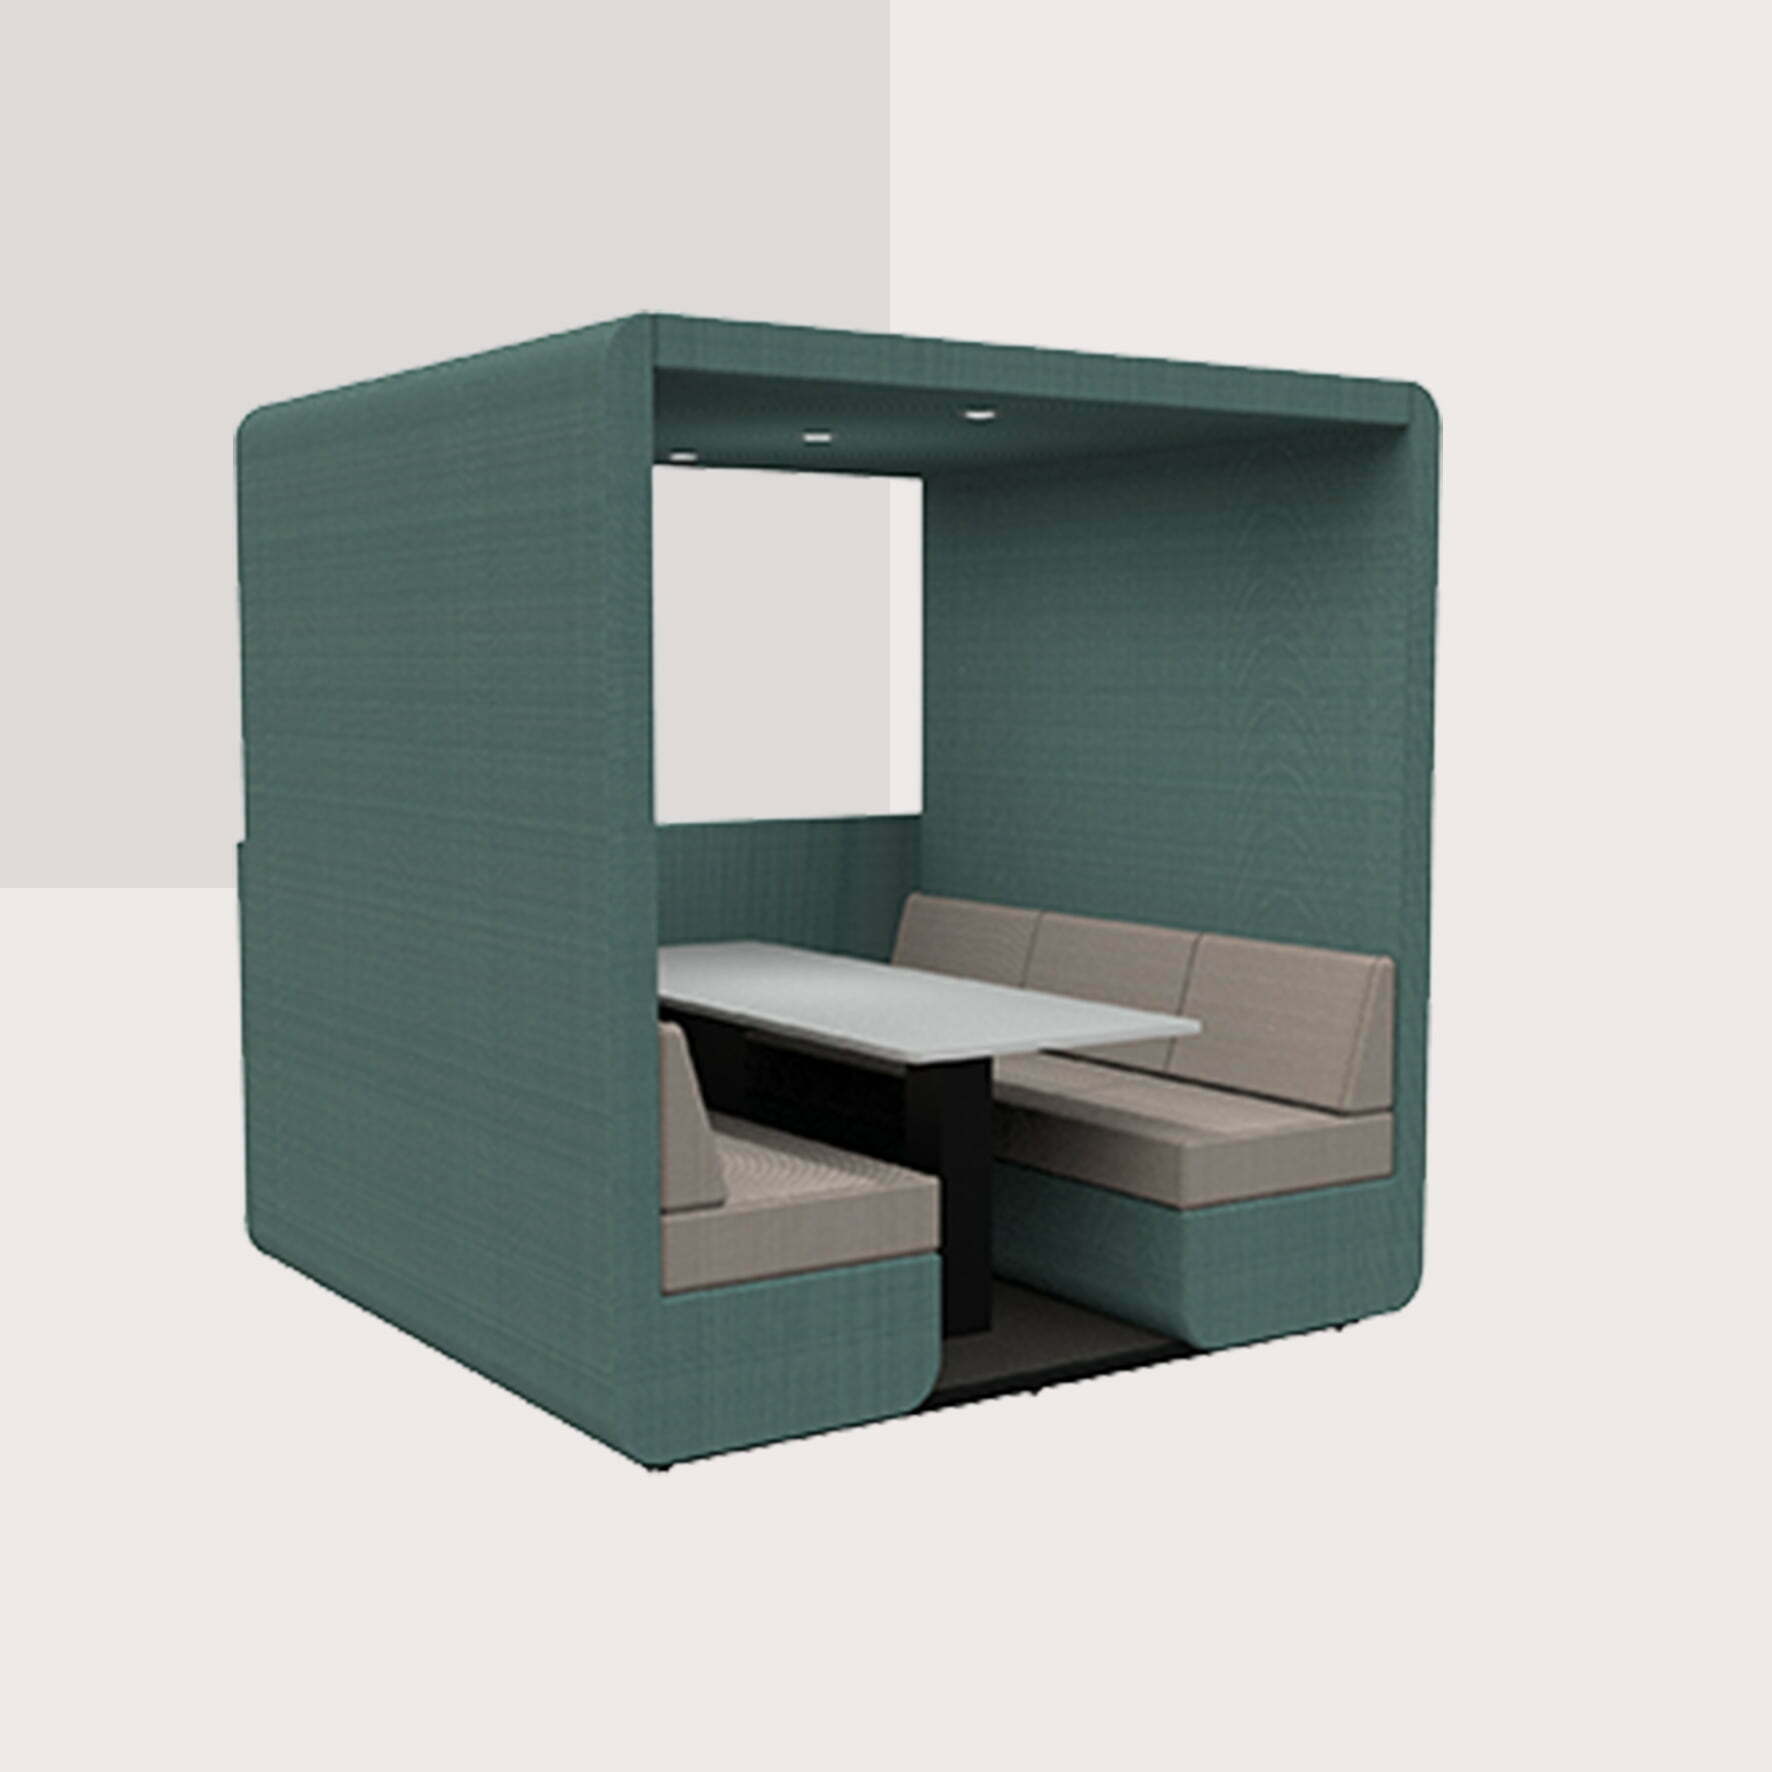 Bob 6 seat booth with half wall